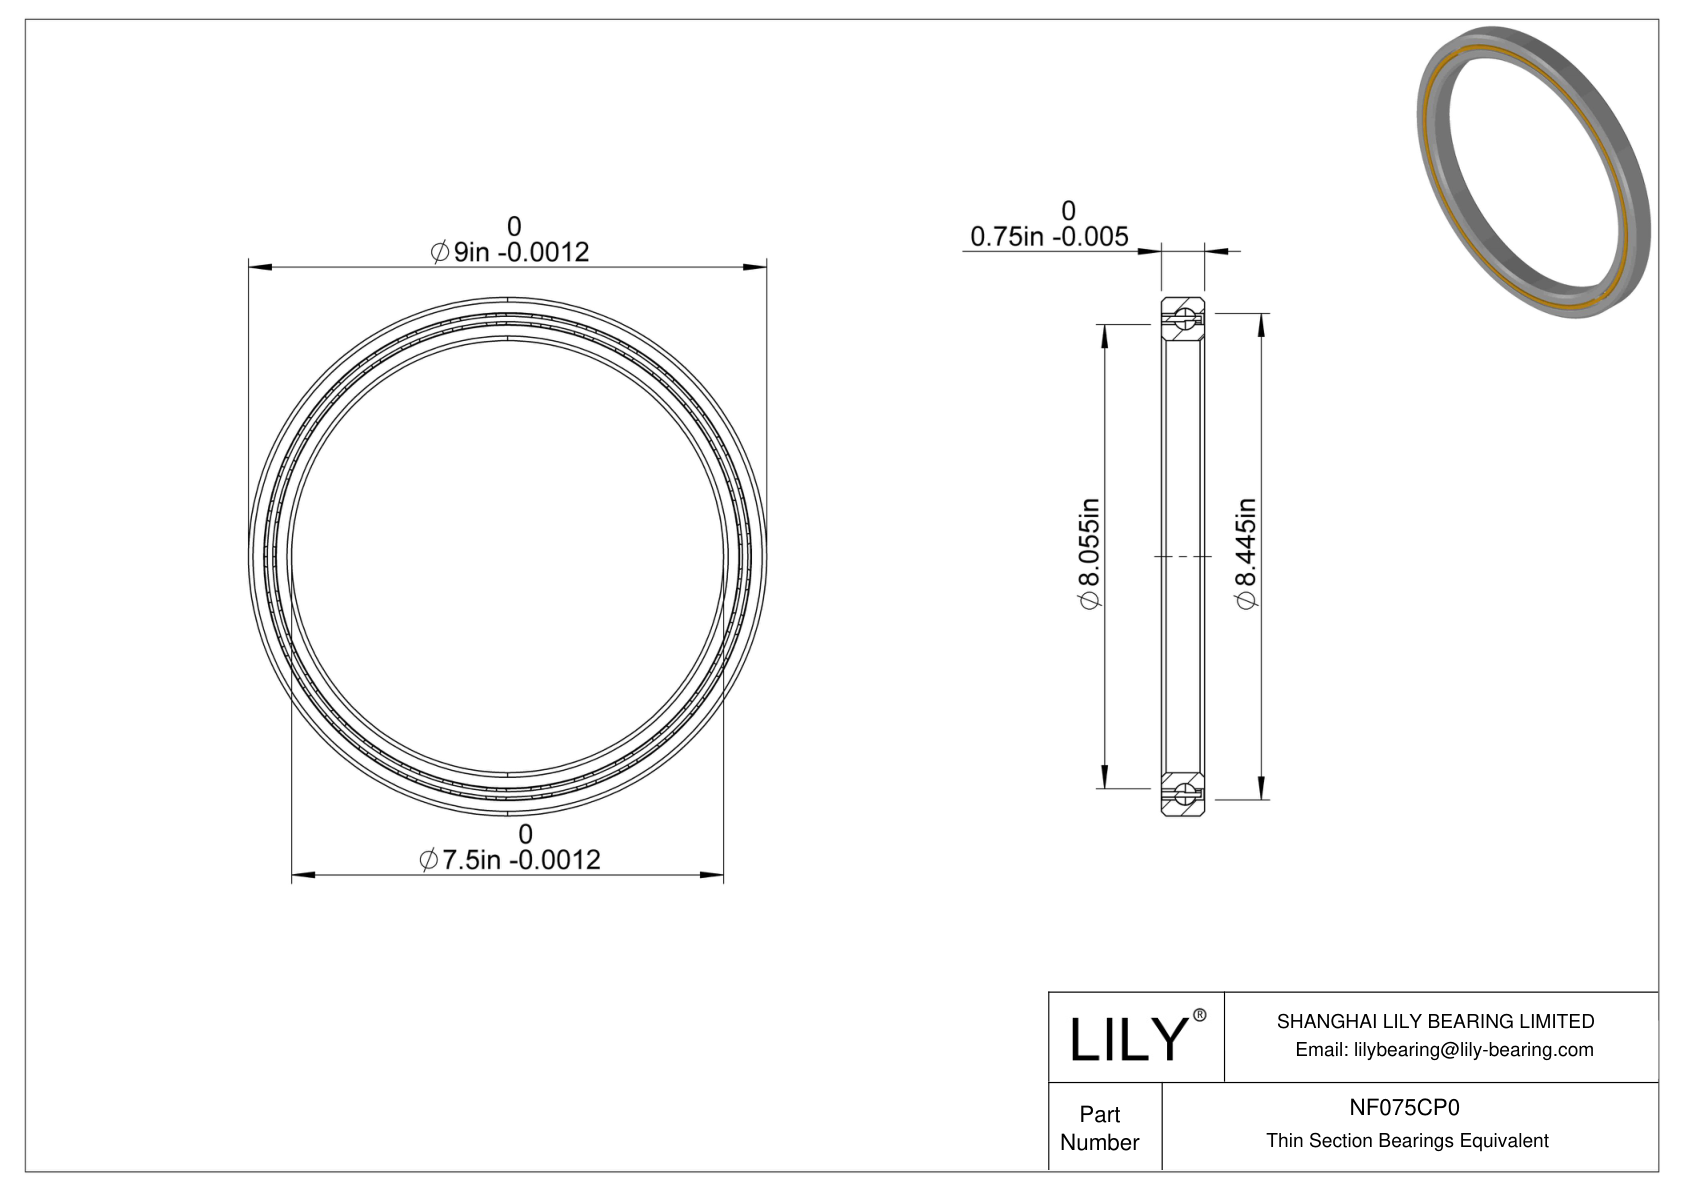 NF075CP0 Constant Section (CS) Bearings cad drawing